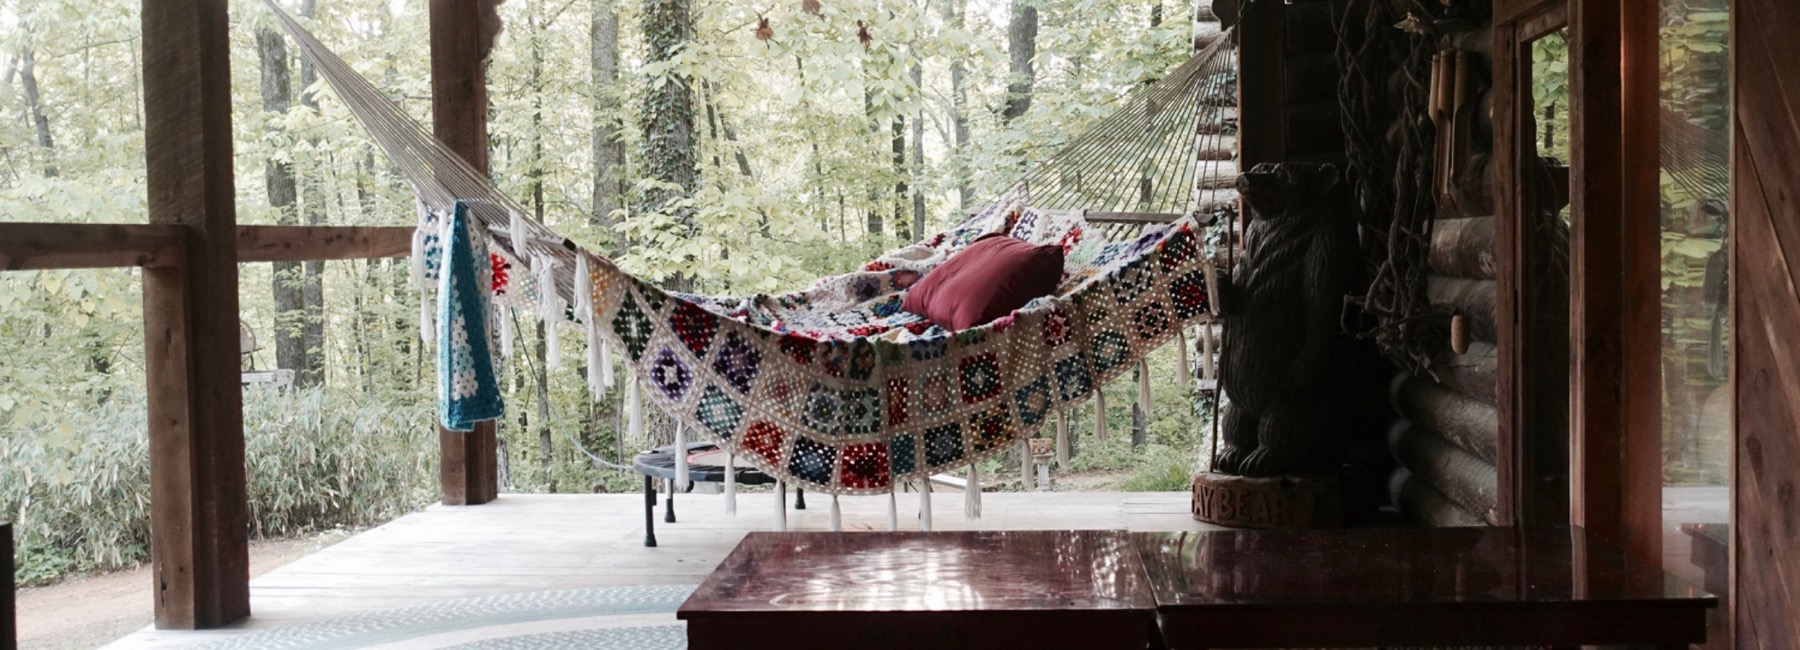 hammock on a porch with forest in background